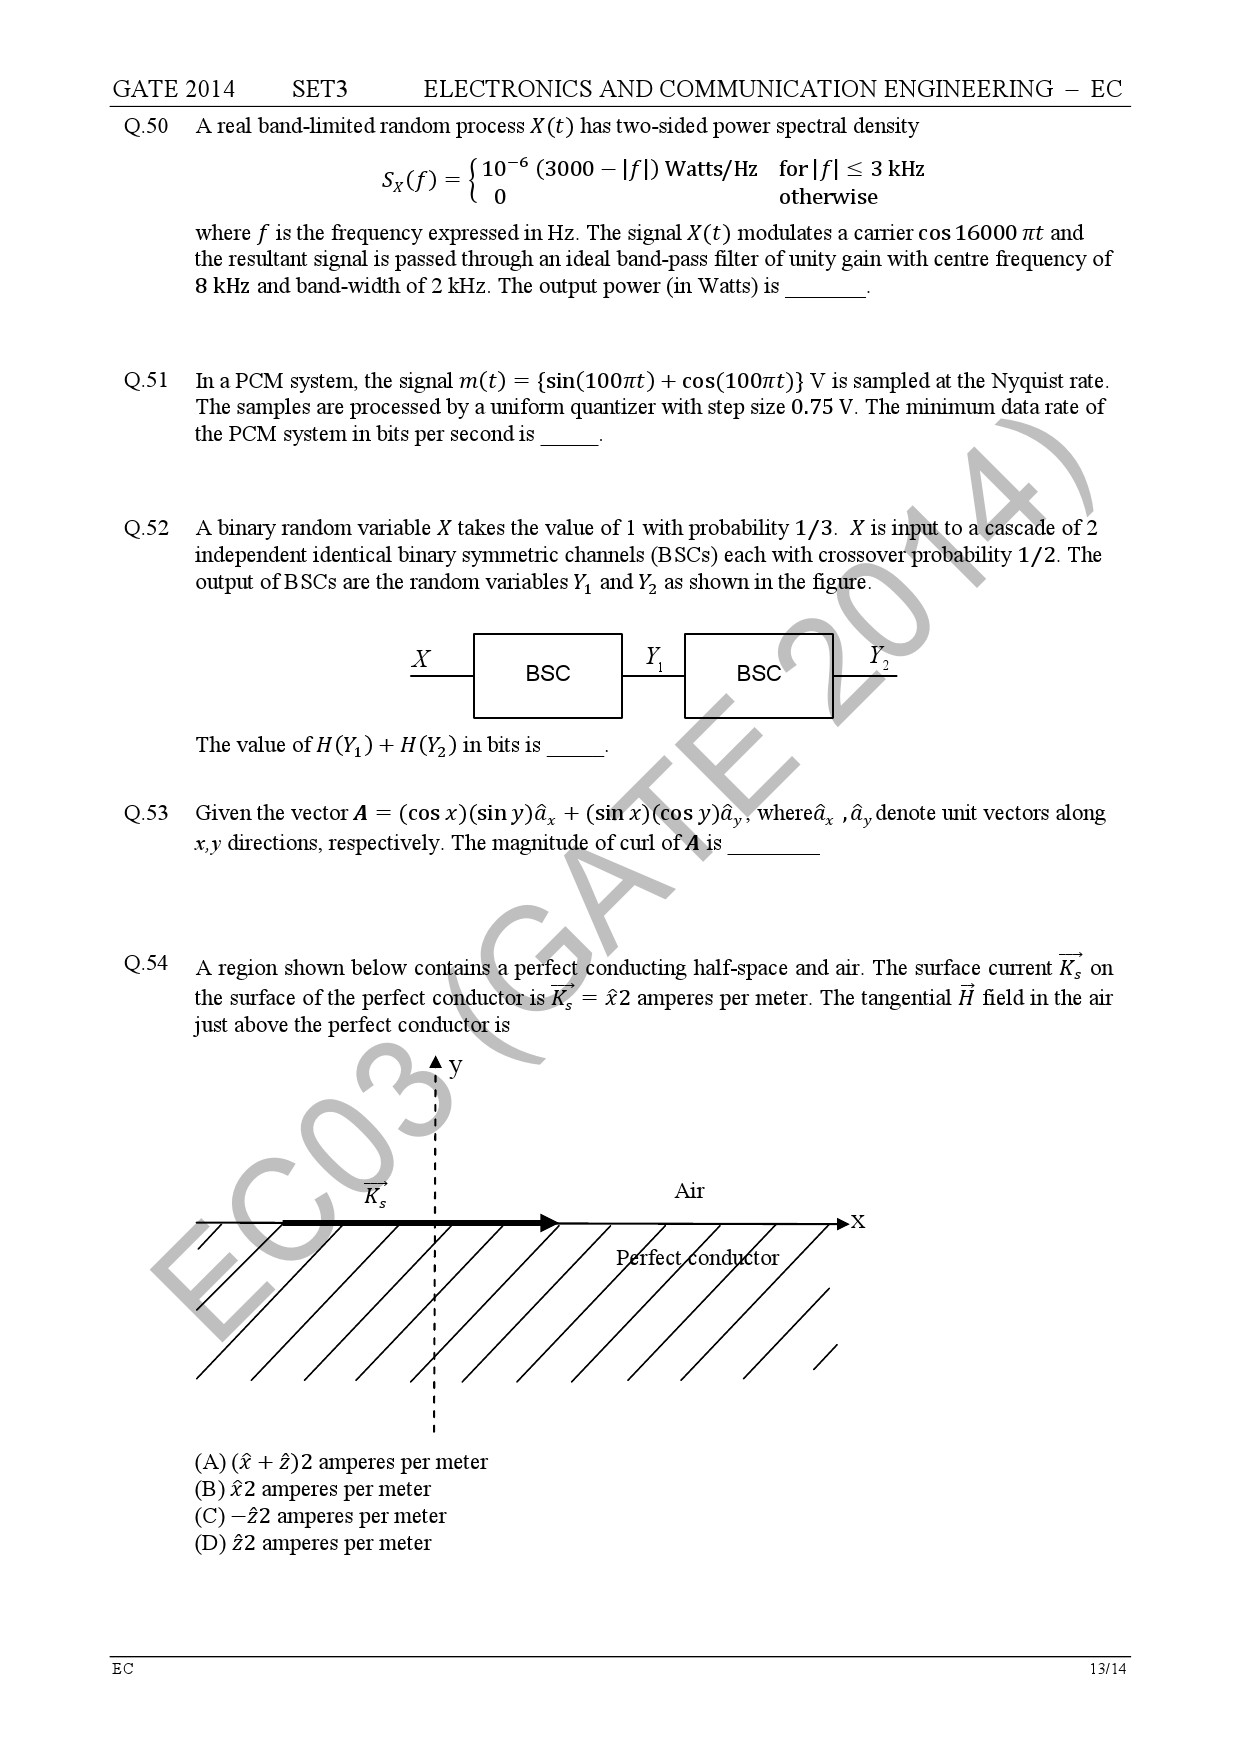 GATE Exam Question Paper 2014 Electronics and Communication Engineering Set 3 20